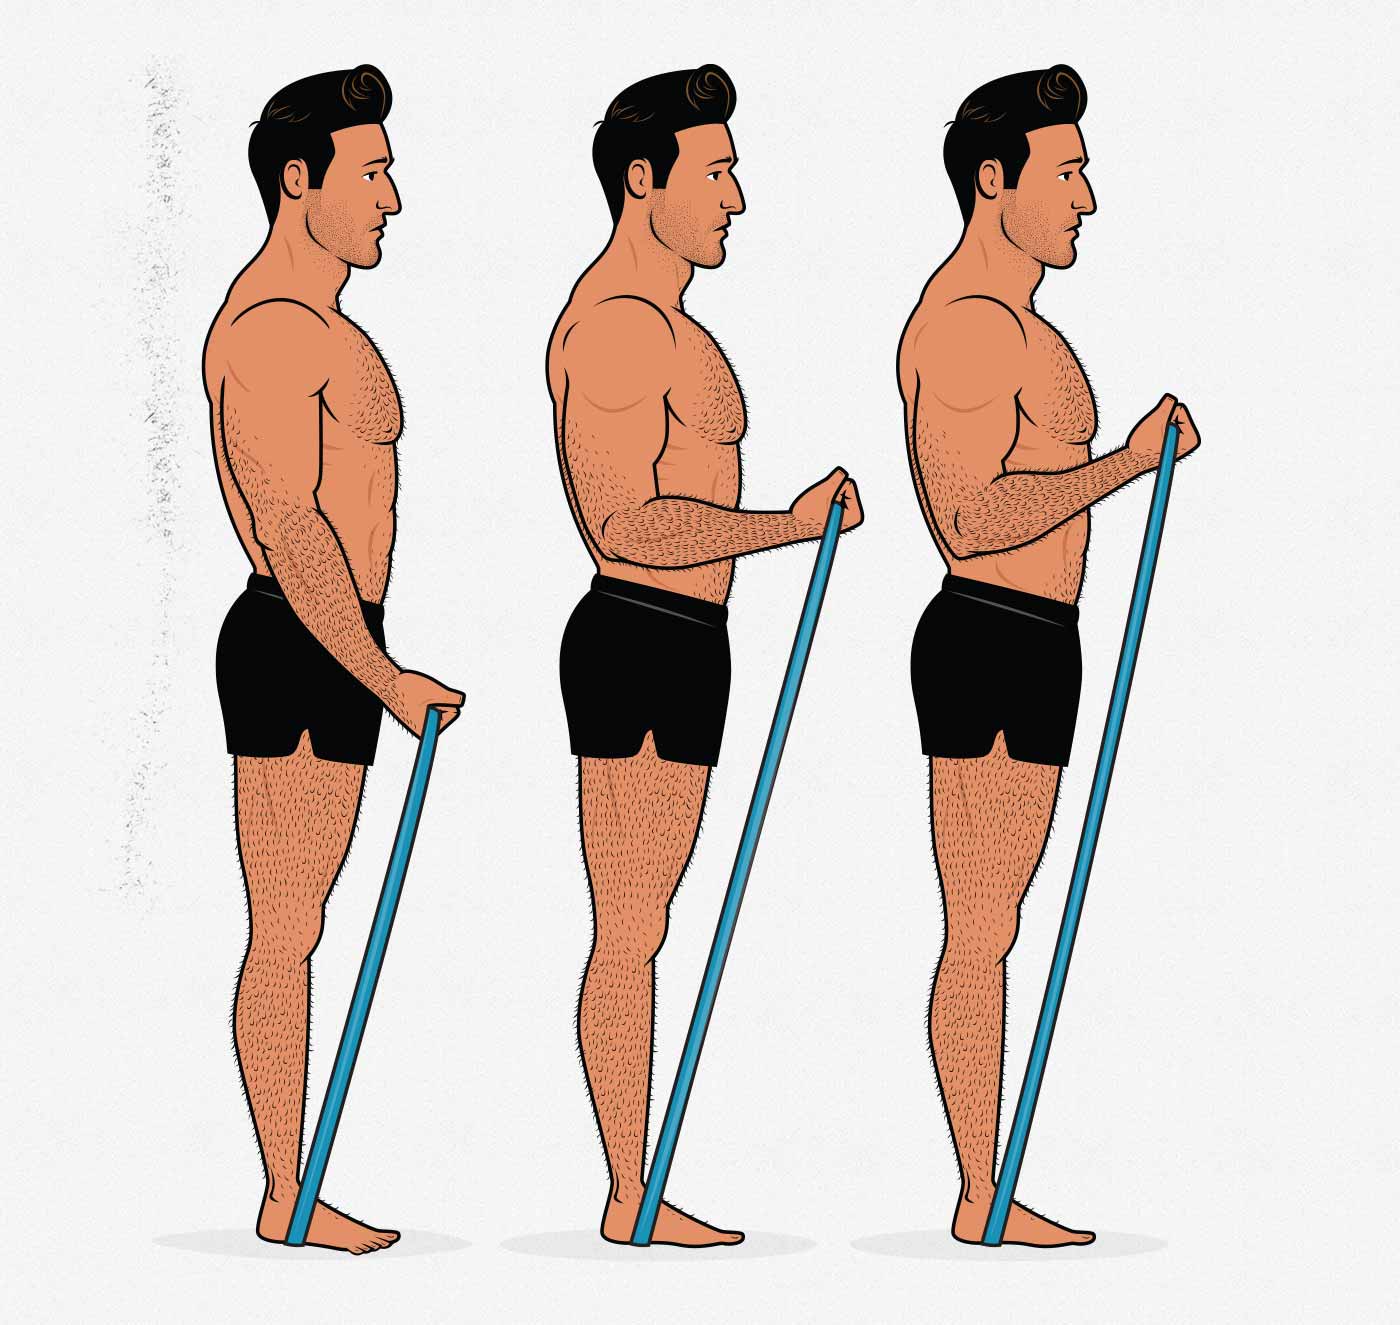 Illustration of a muscular man doing biceps curls with resistance bands.